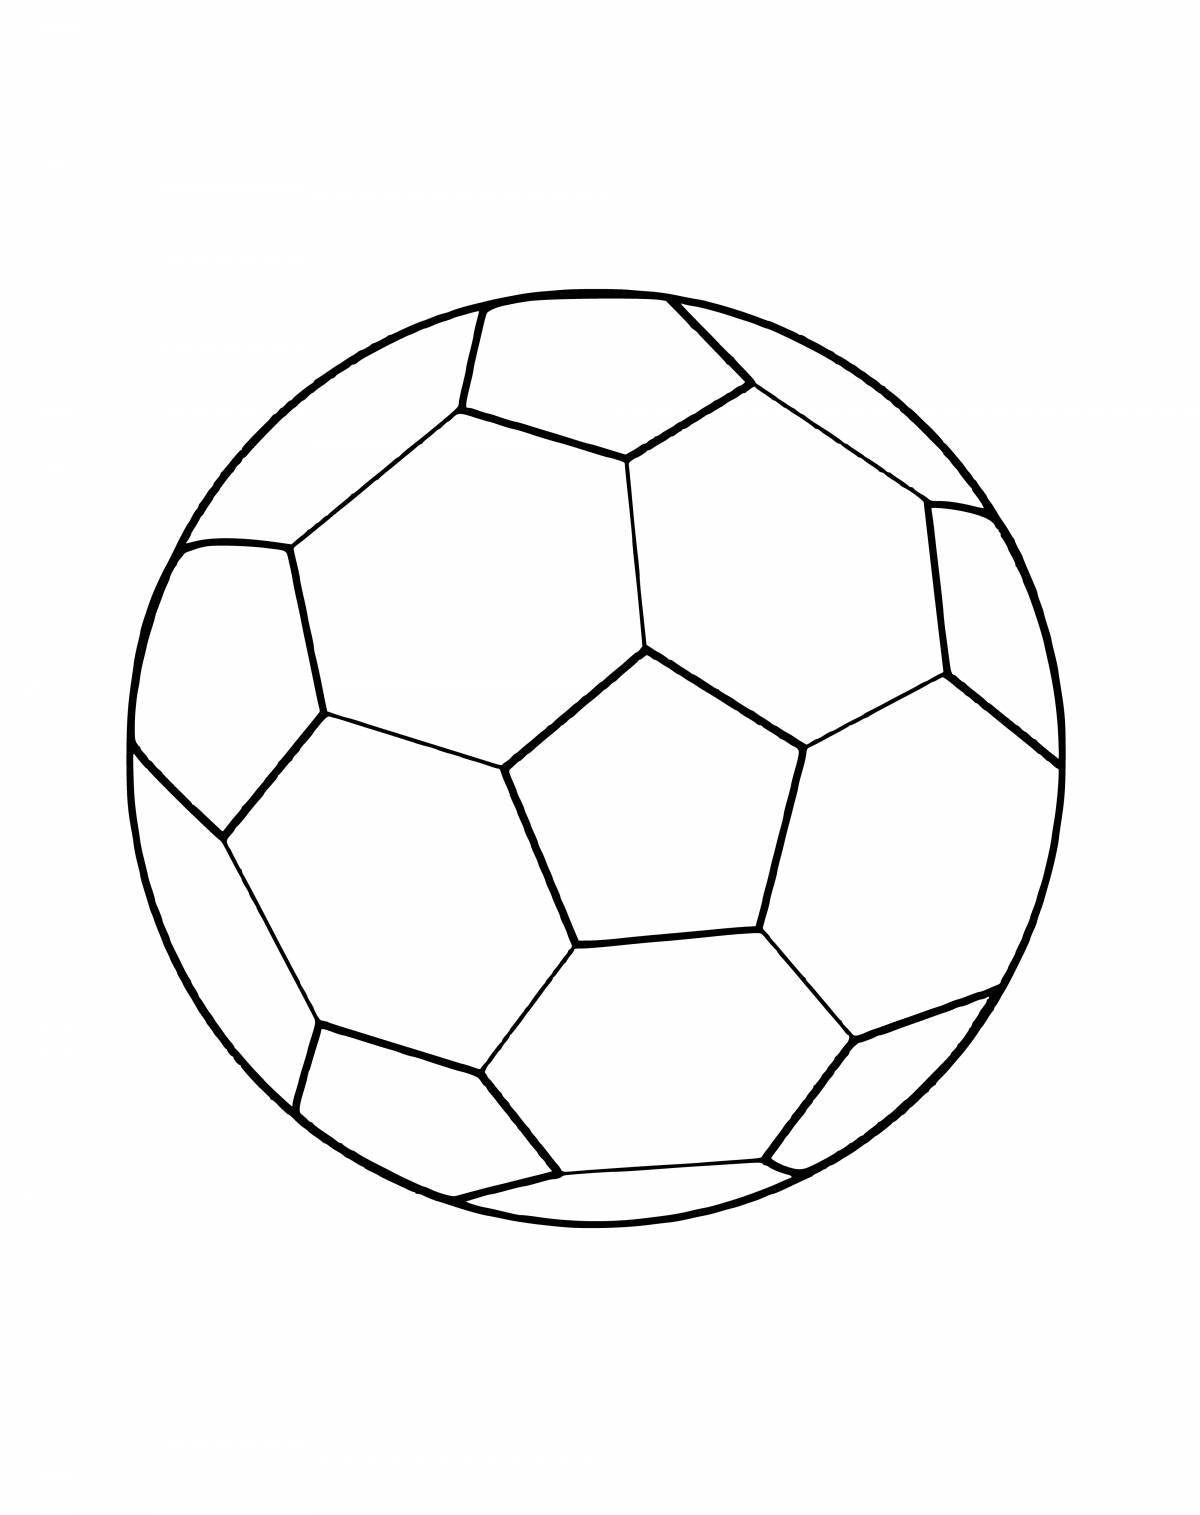 Exquisite football coloring book